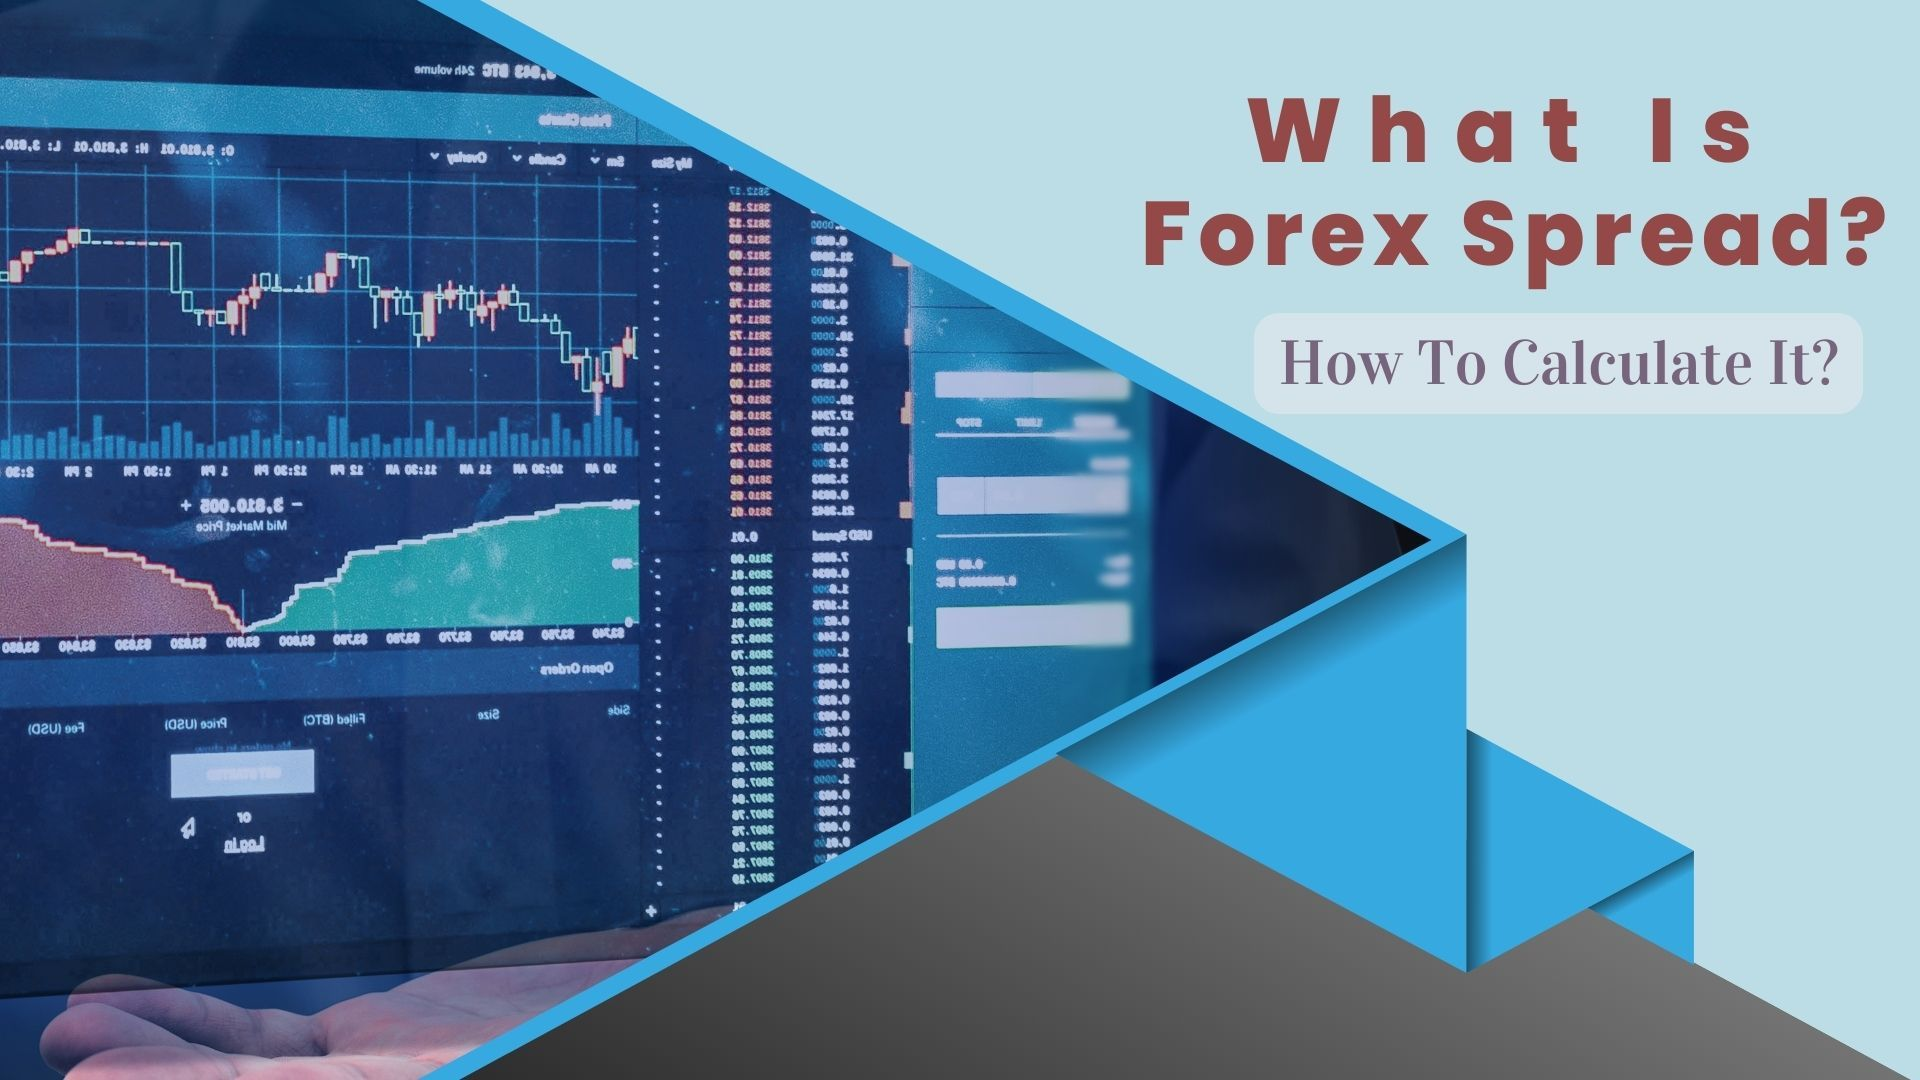 Forex Trading & How To Calculate It